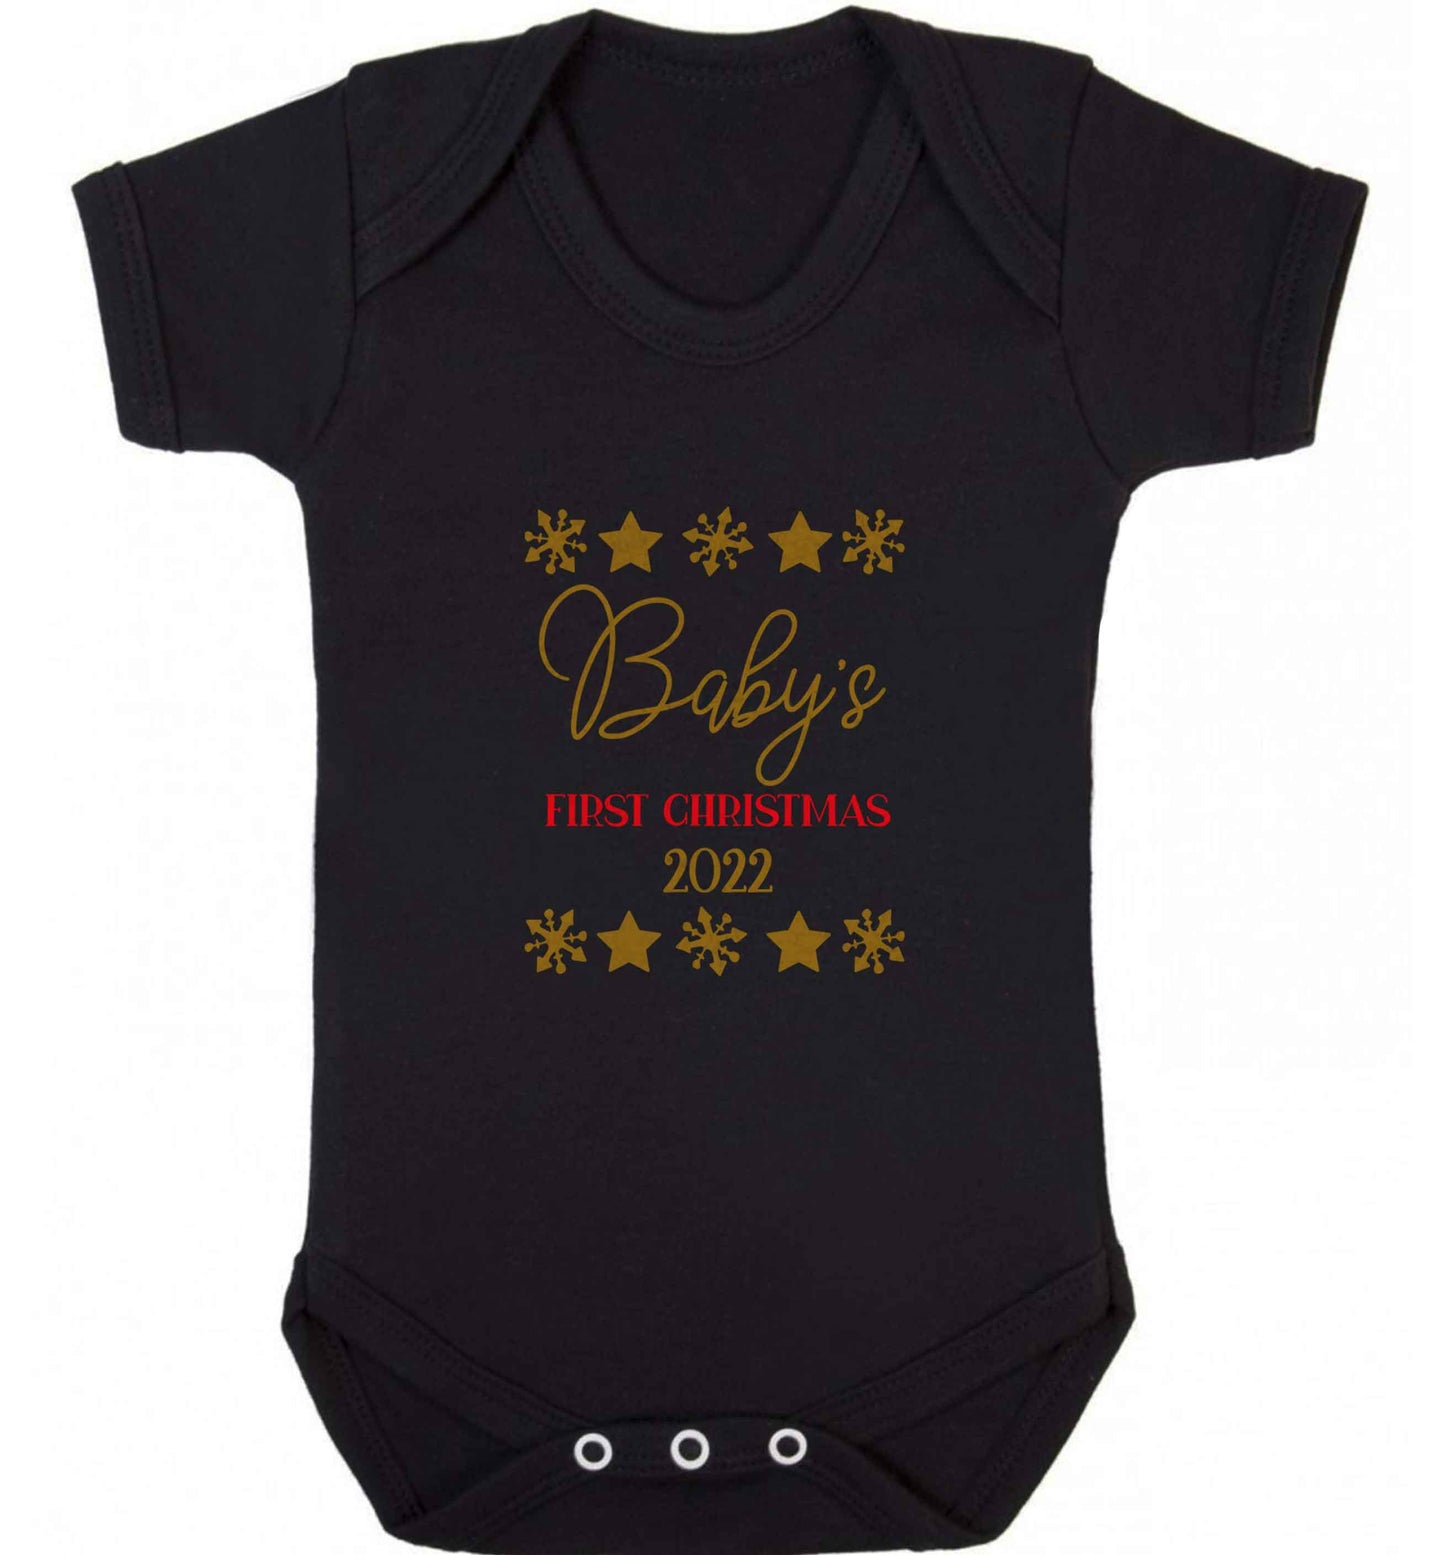 Baby's first Christmas baby vest black 18-24 months